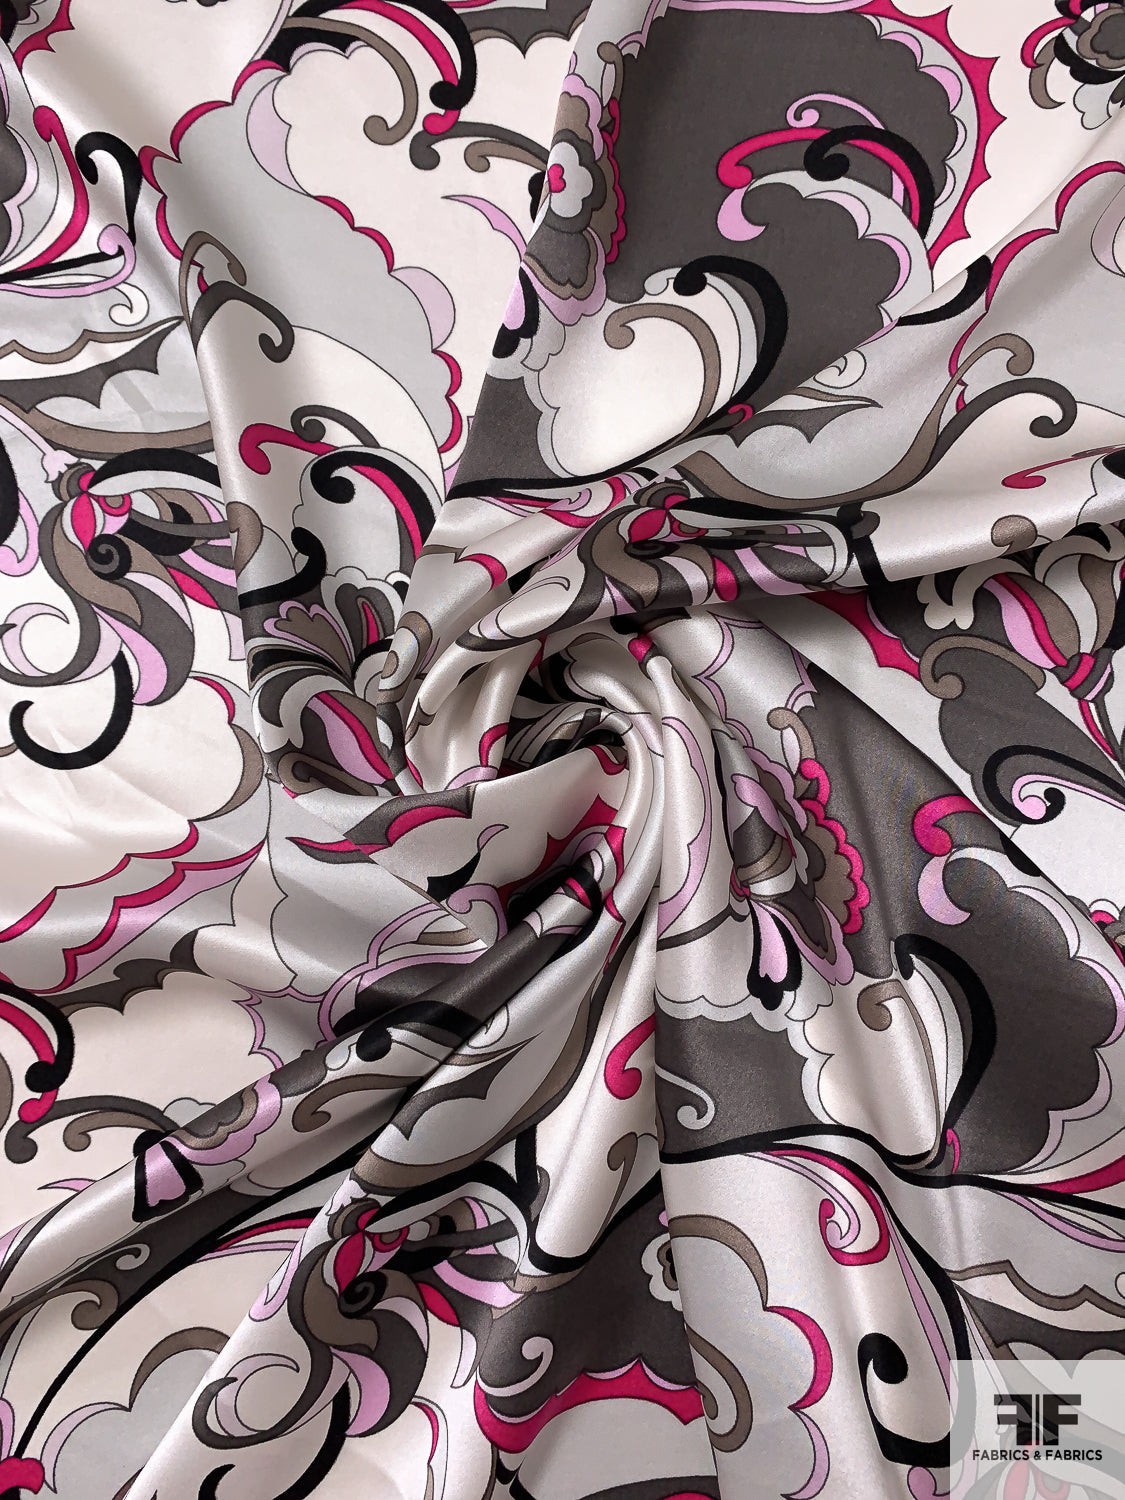 Pucci-esque Paisley-Like Printed Silk Charmeuse - Purple / Greens / Oranges  / White - Fabric by the Yard